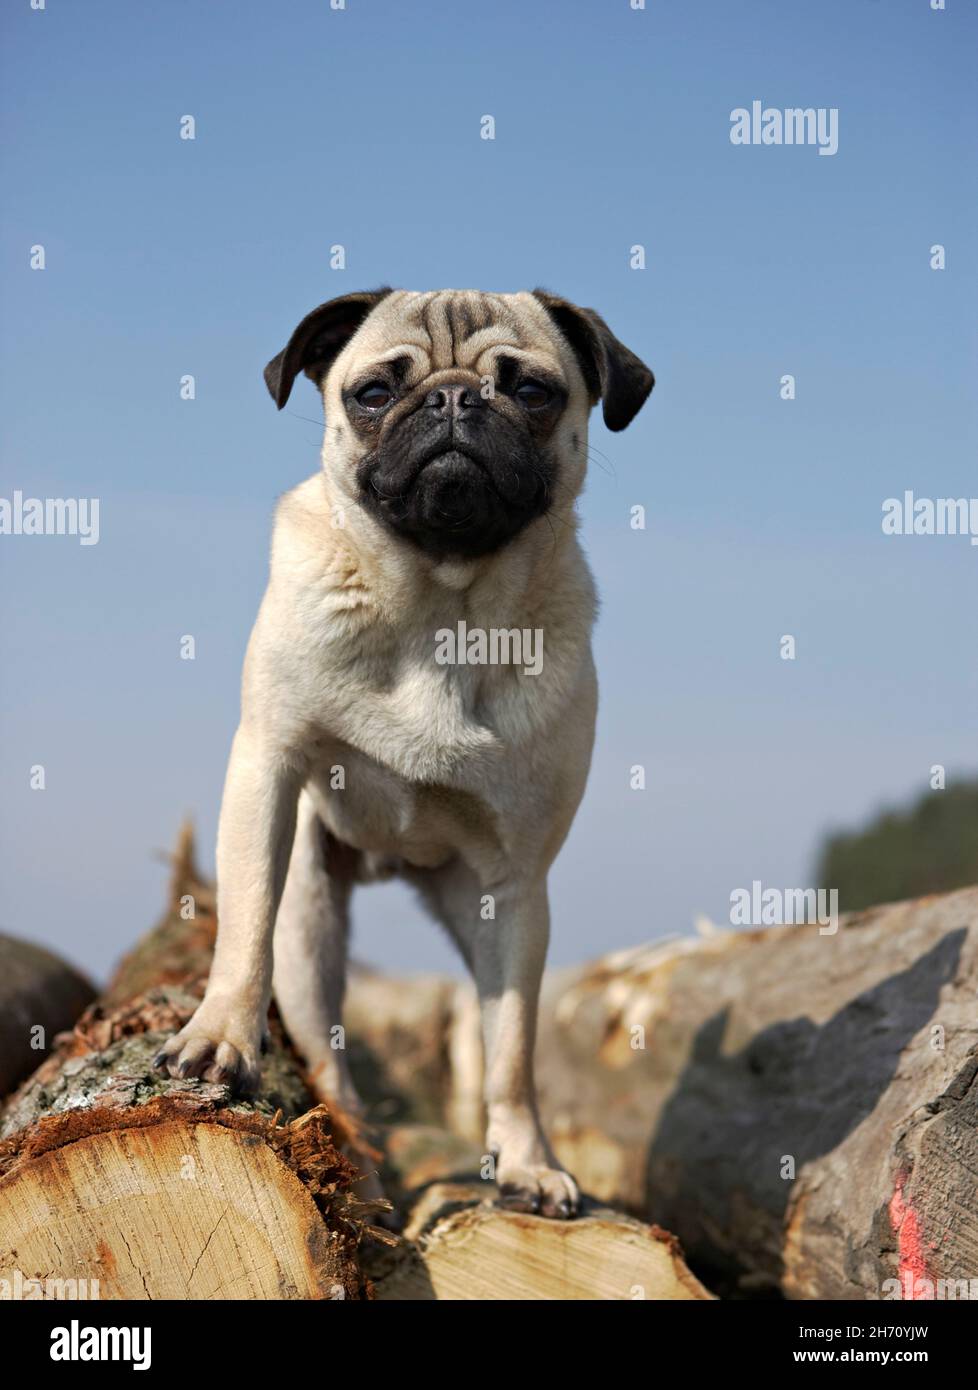 Pug. An adult dog standing on a pile of wood. Germany... Stock Photo